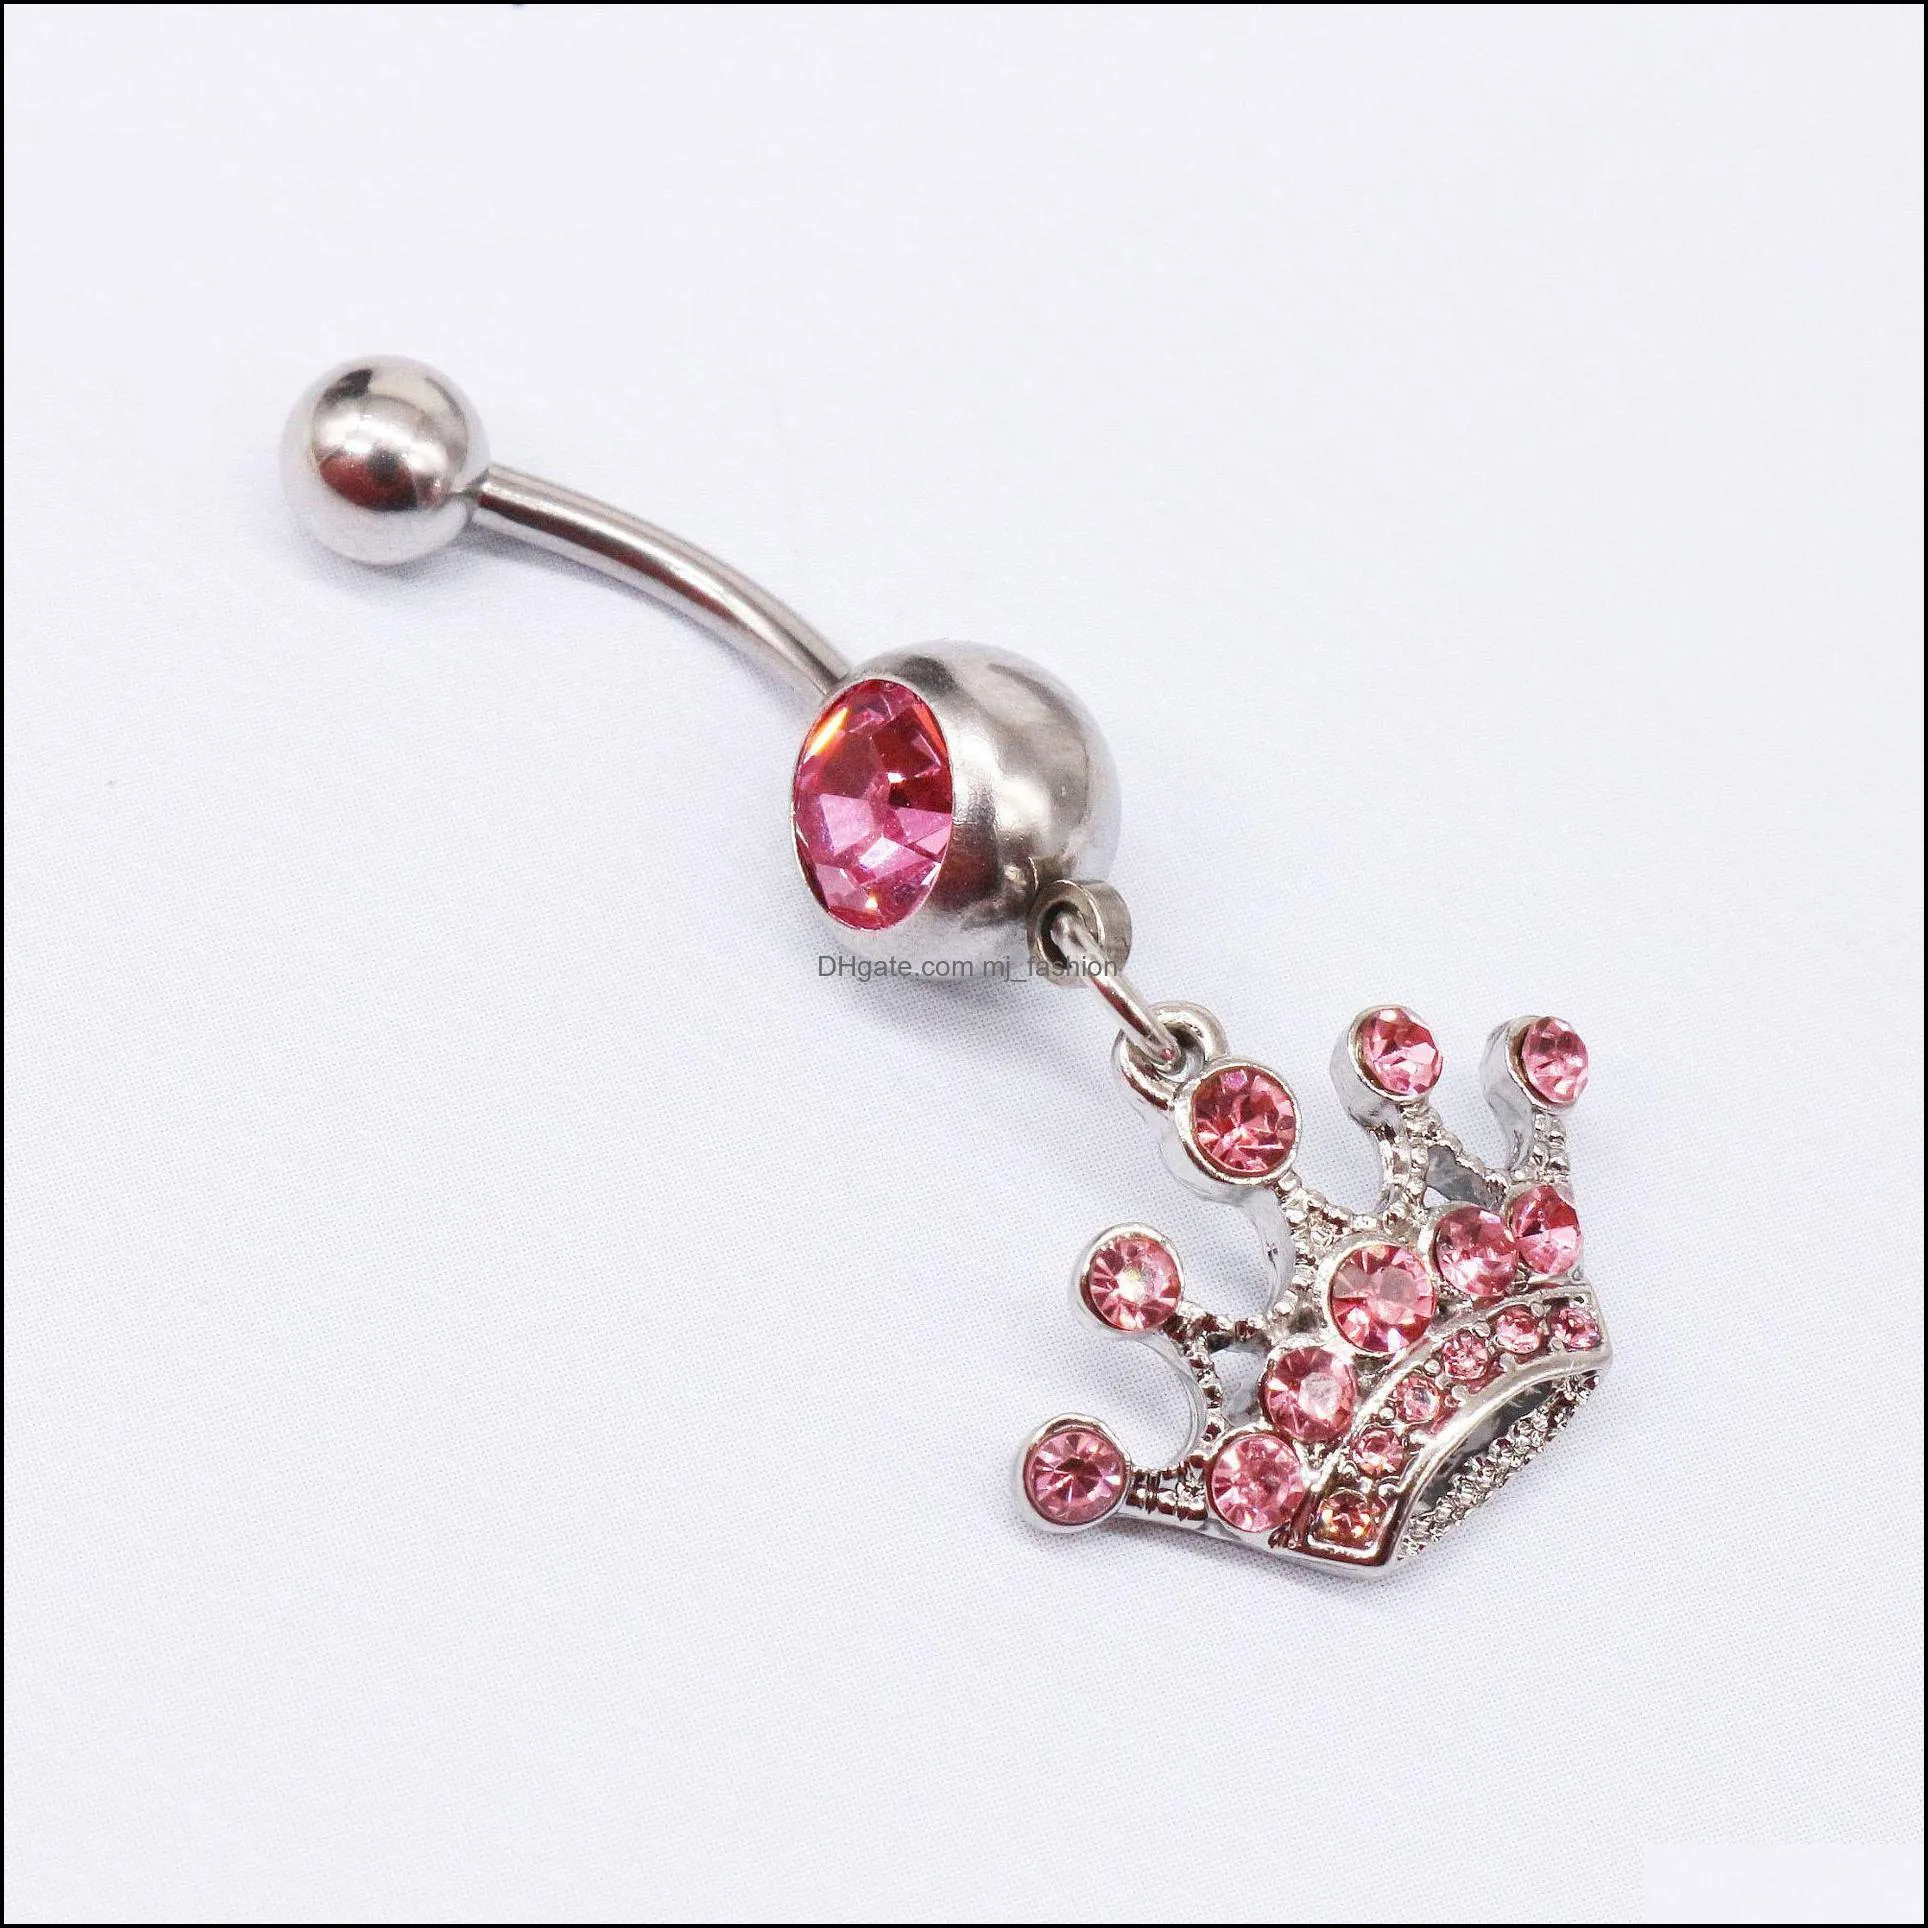 navel & bell button rings fashion body jewelry diamond-studded ship anchor belly button stainless steel umbilical ring